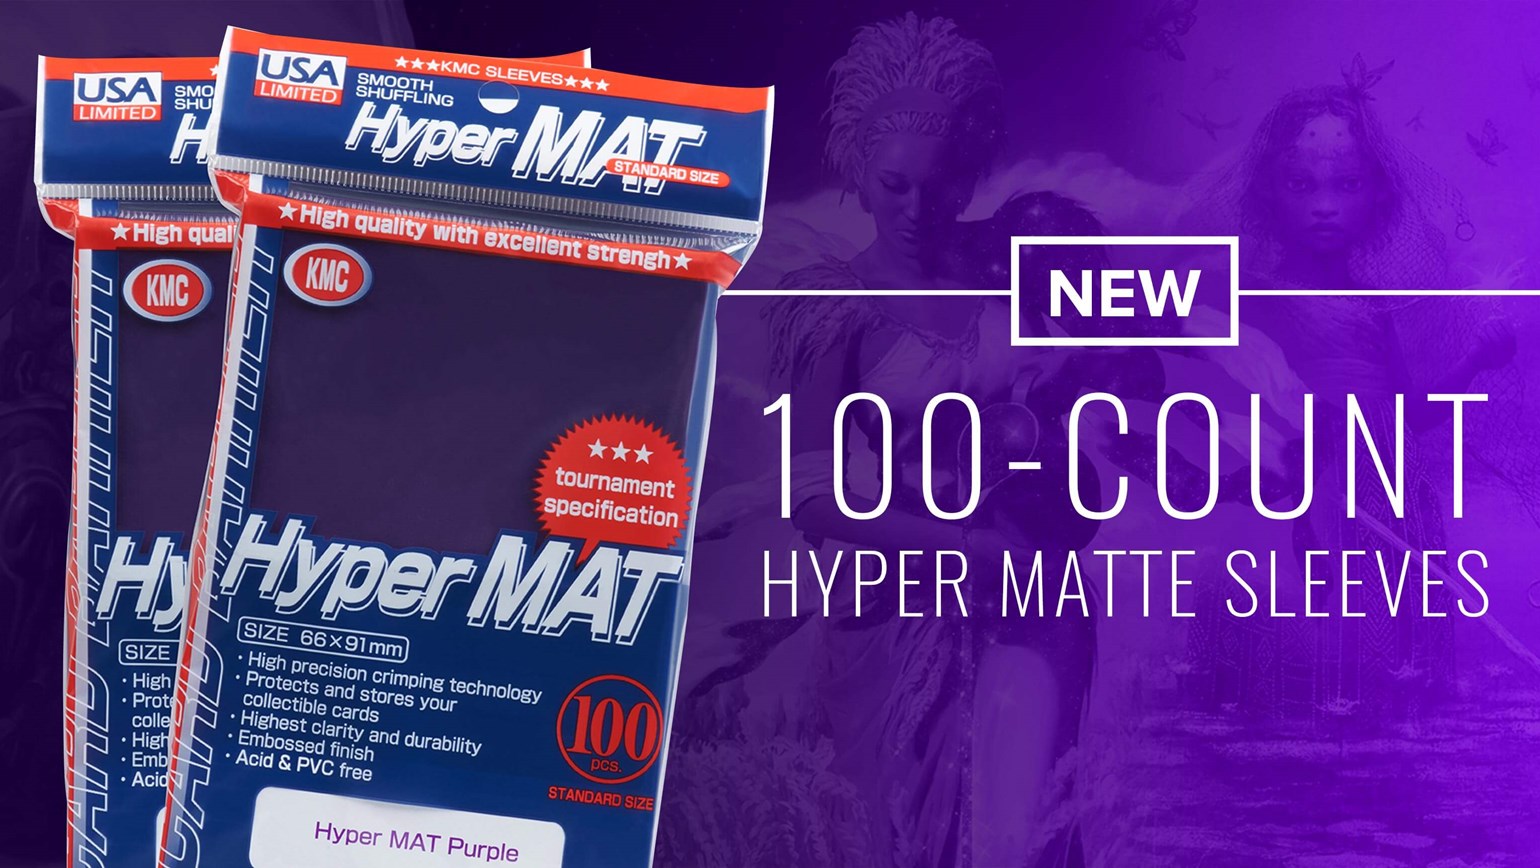 KMC USA 100-Count Hyper Matte Sleeves for MTG Commander Decks Now Available on TCGplayer